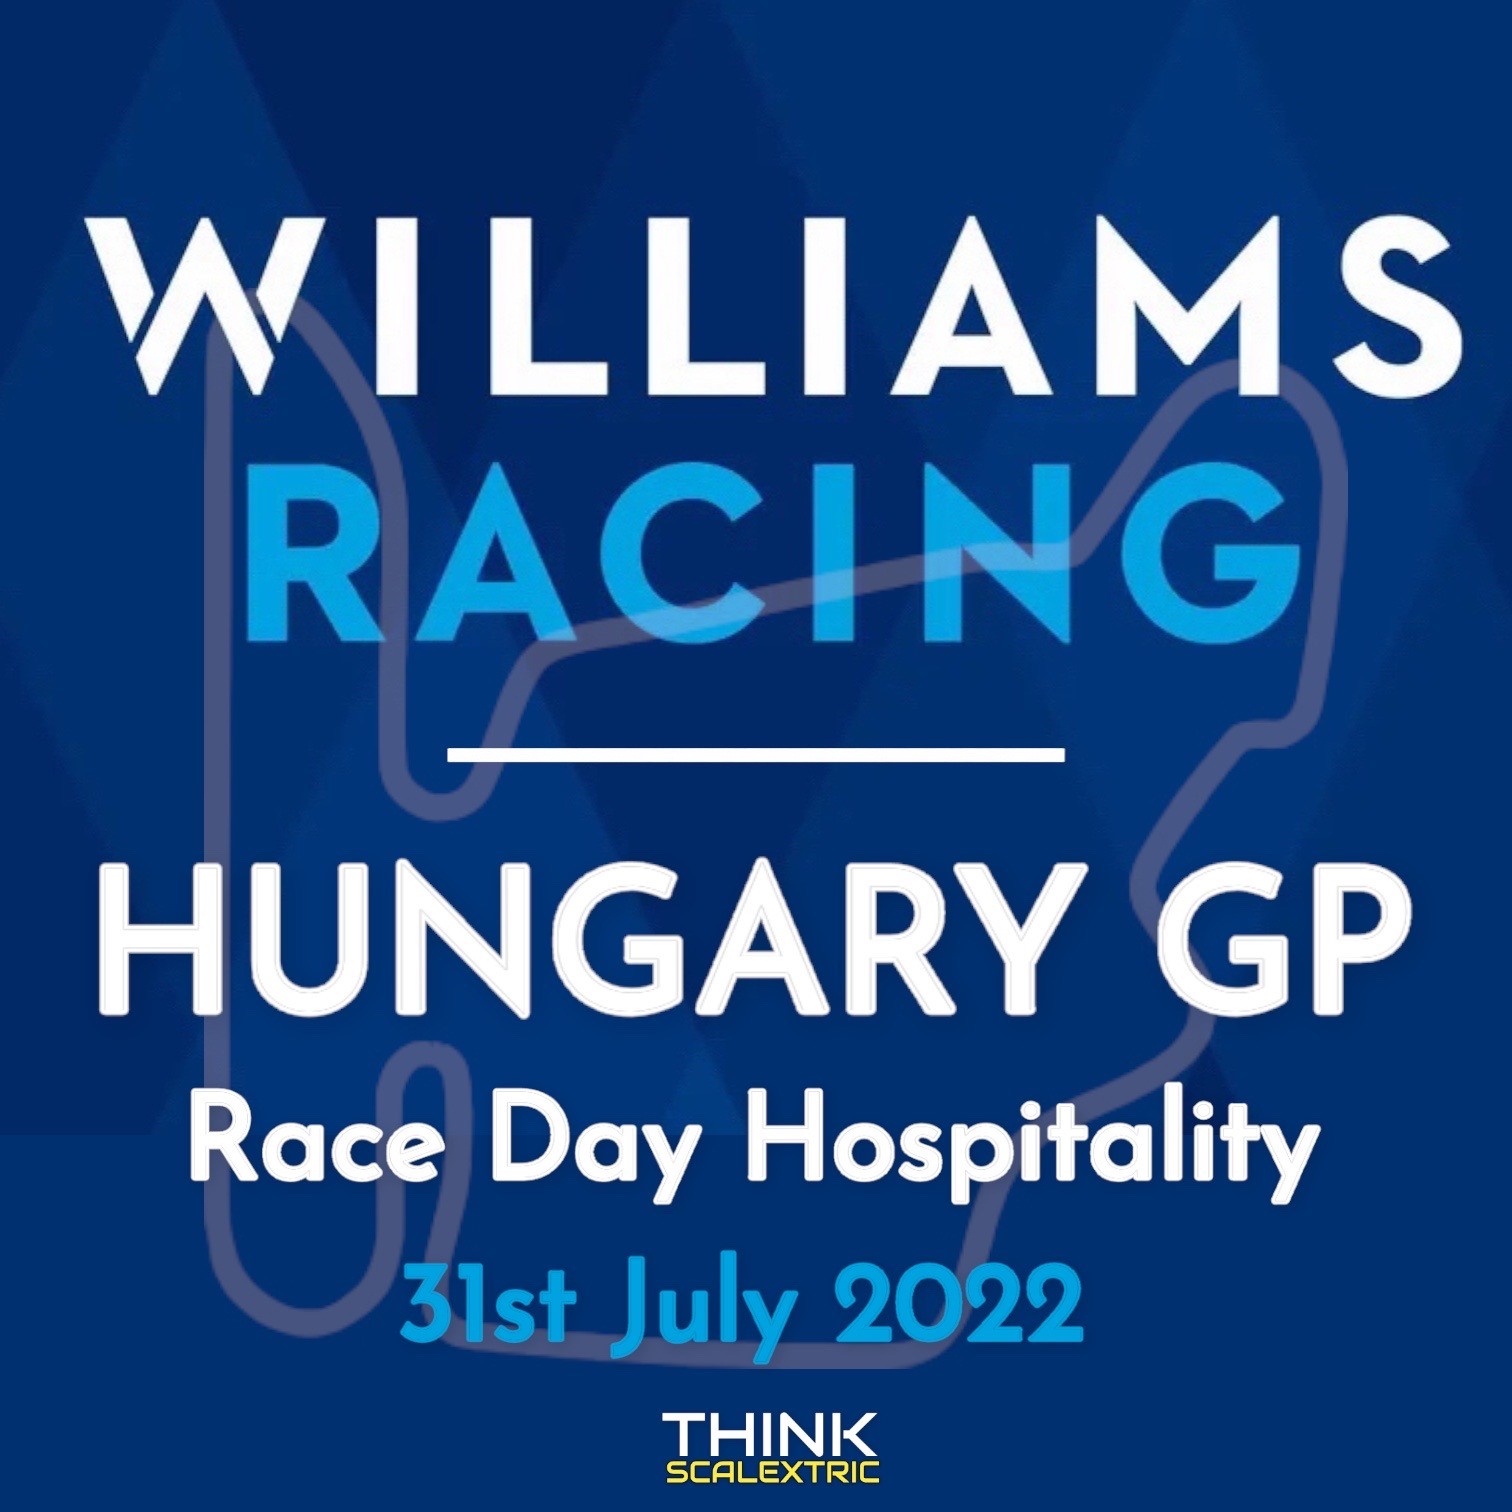 williams racing race day hospitality hungary f1 gp 2022 giant scalextric bespoke track build